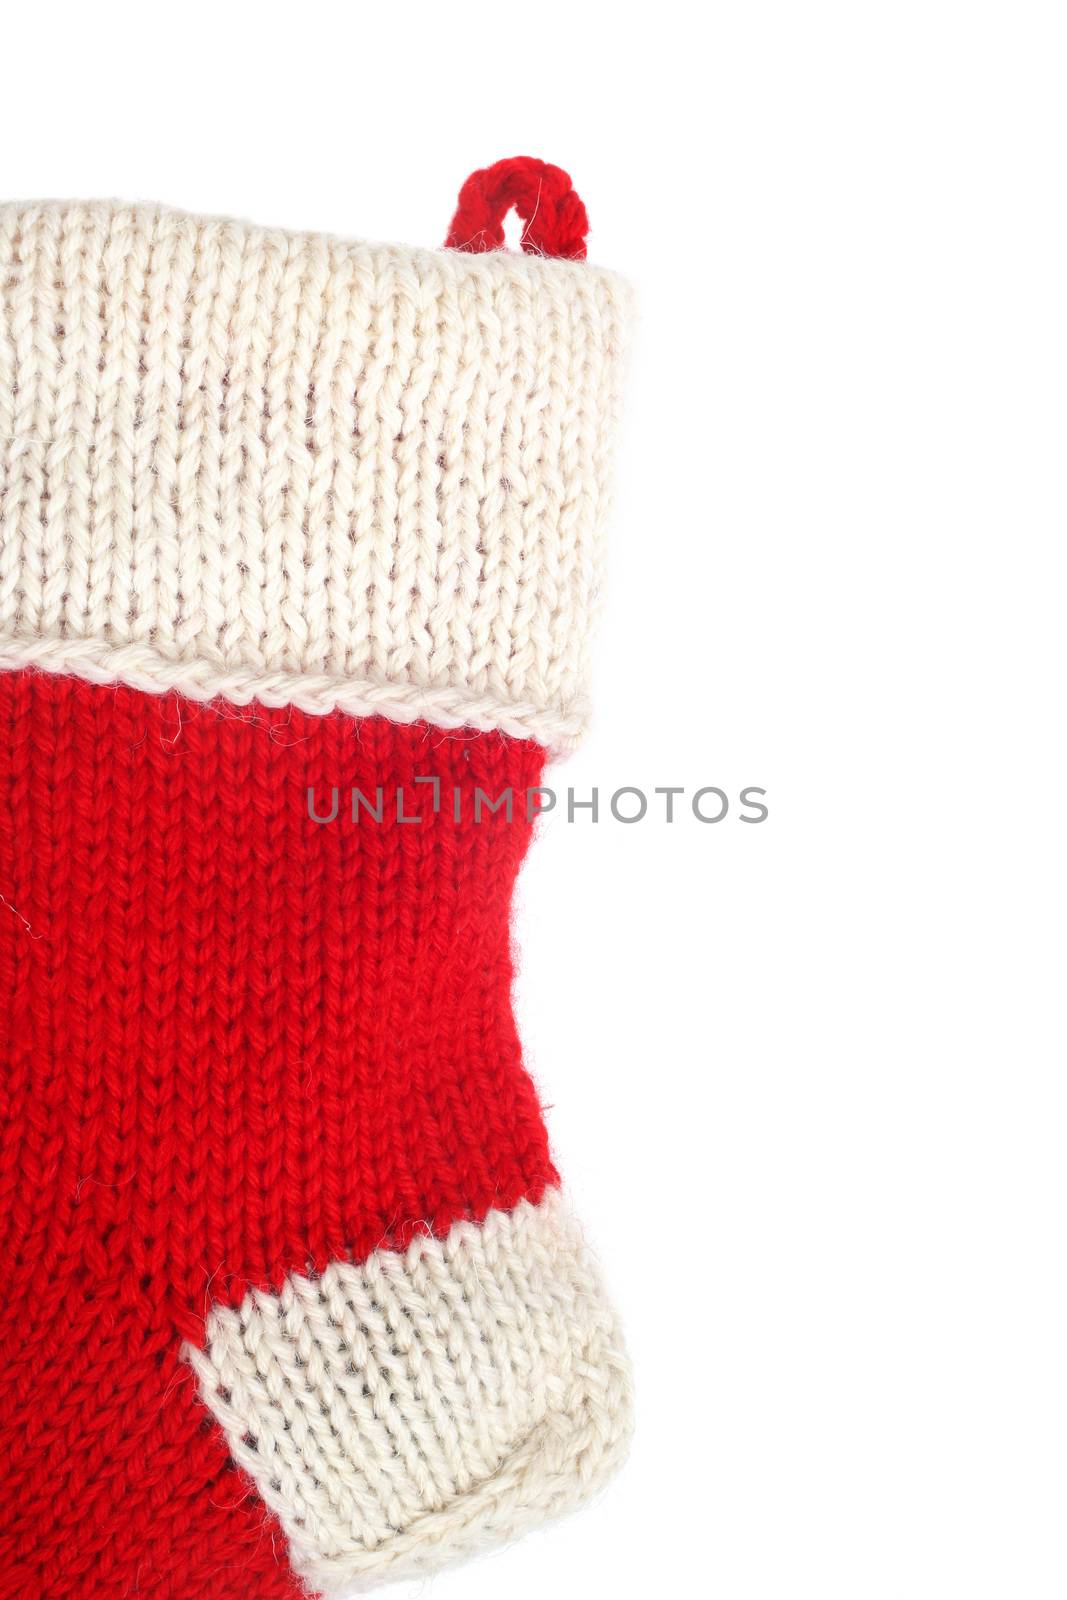 Red Christmas sock isolated on white background